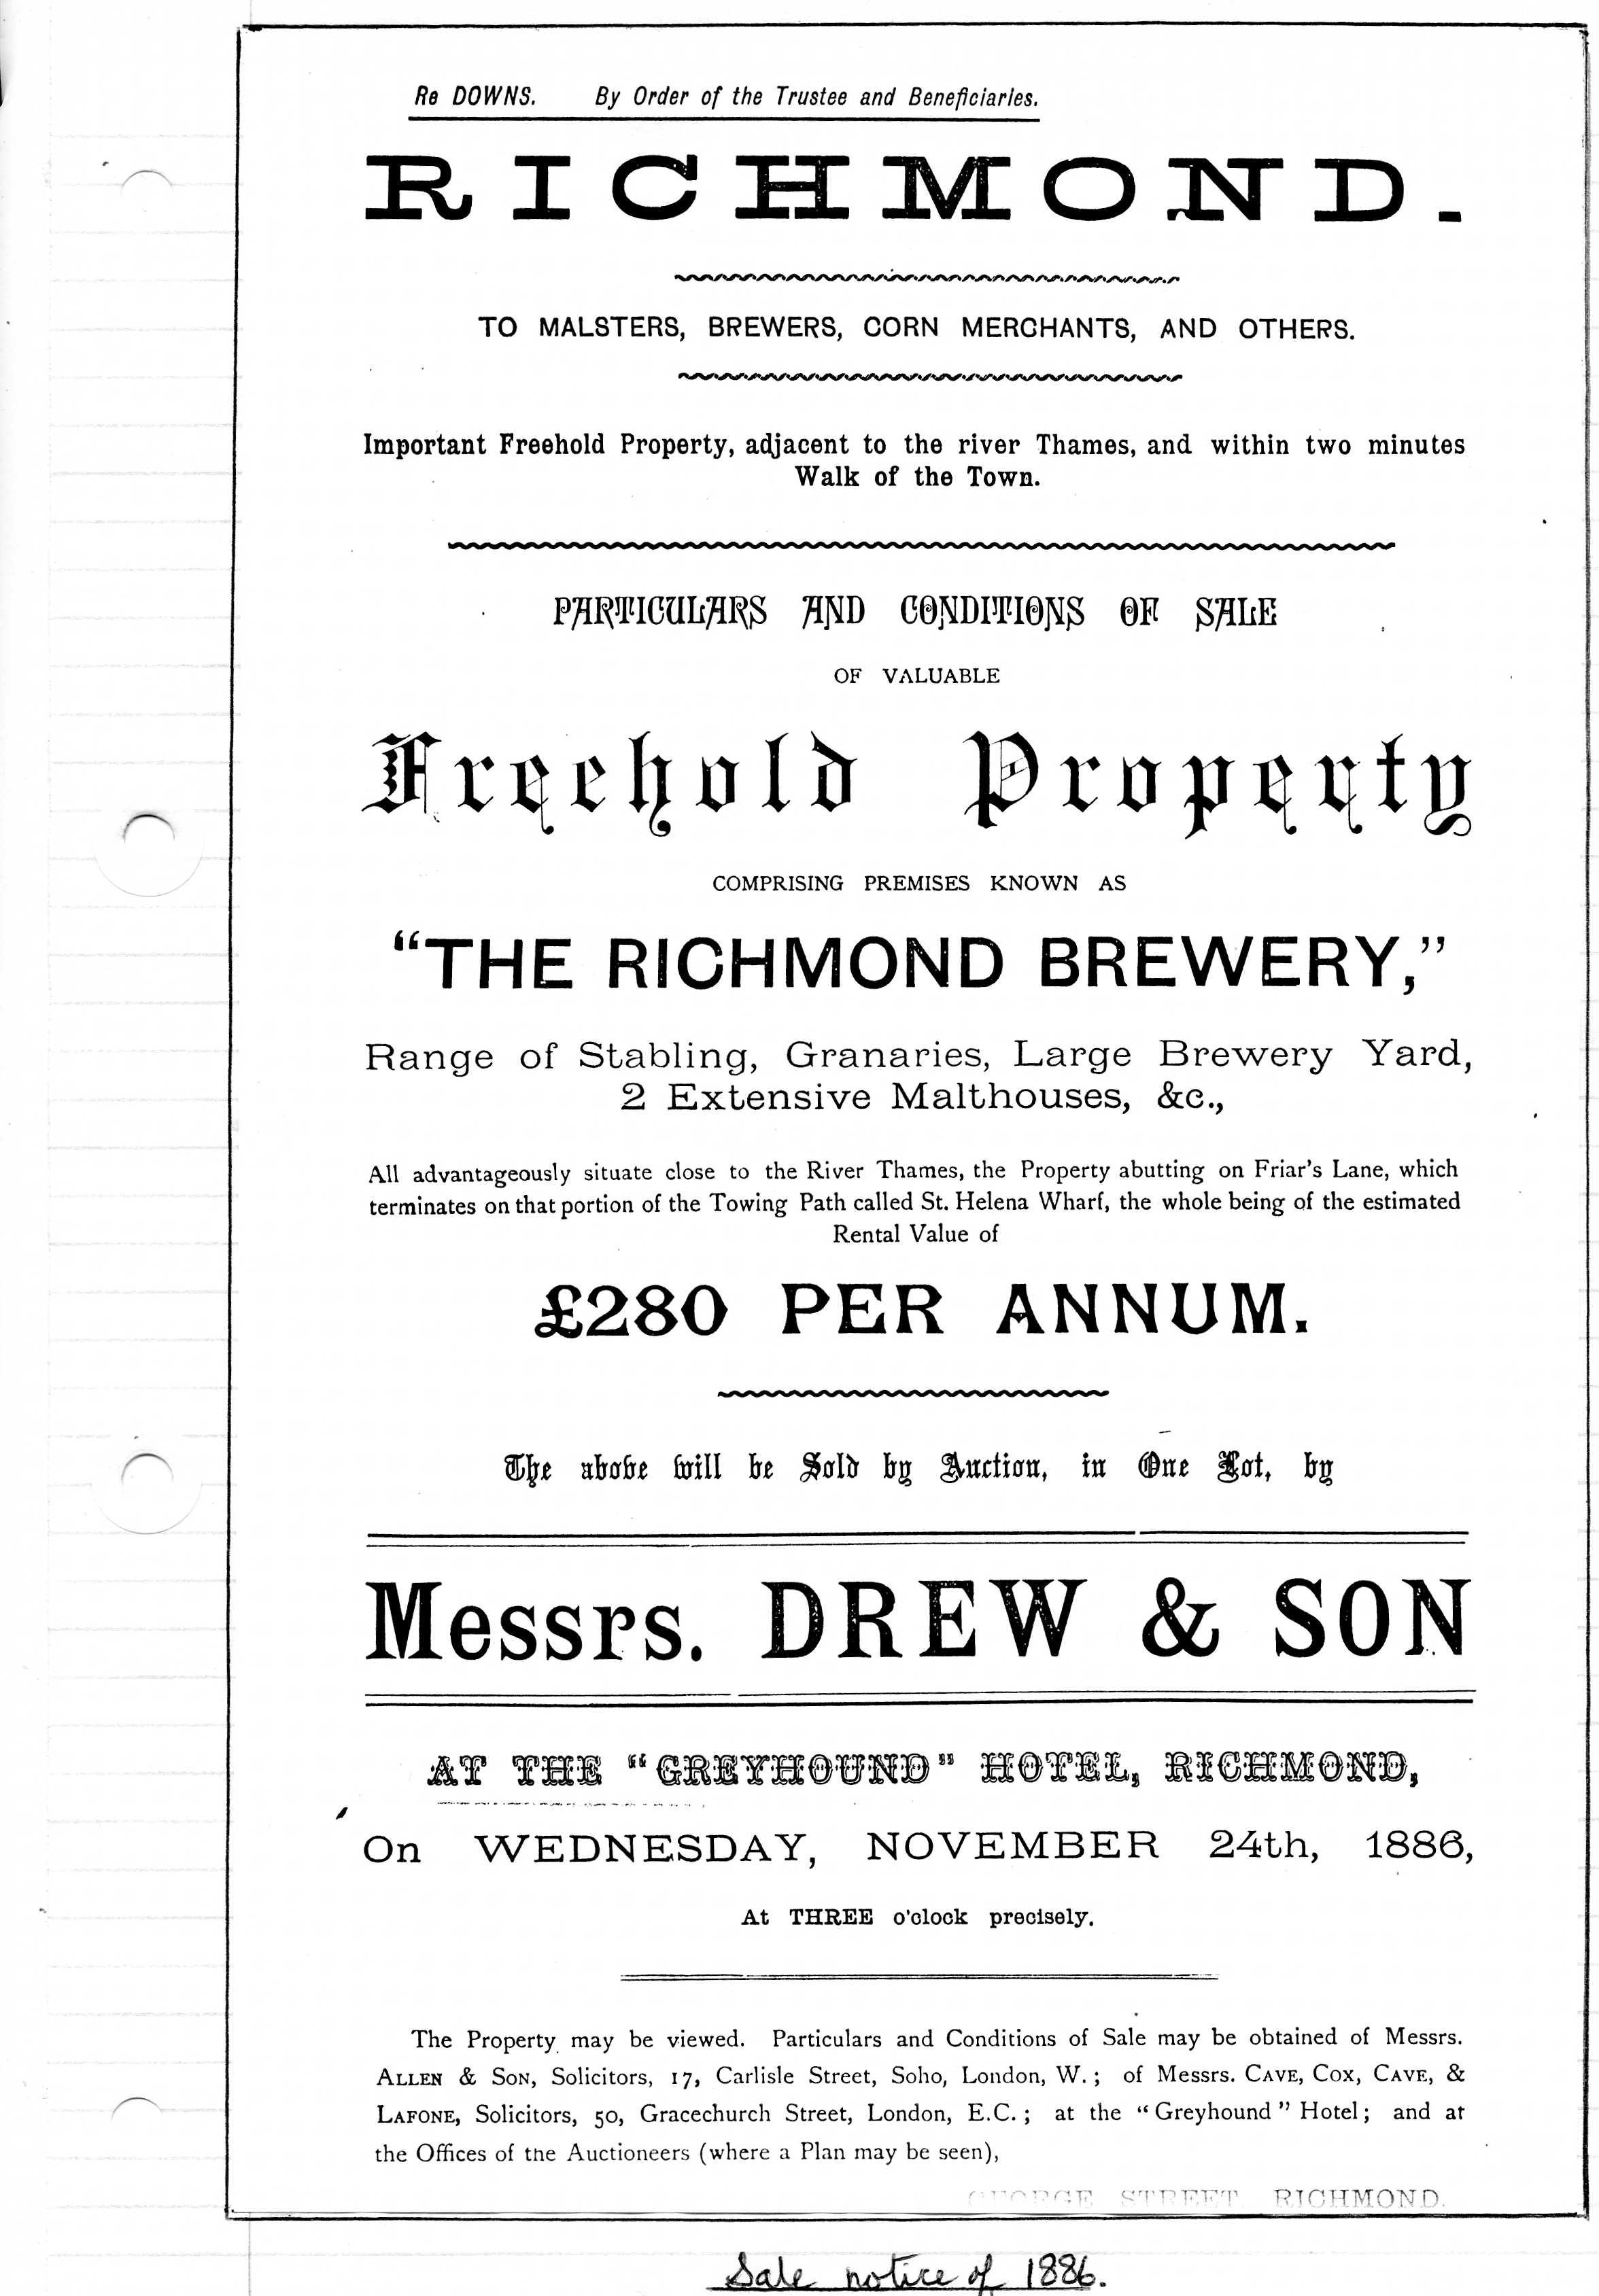 thumb]The sale notice from 1886.